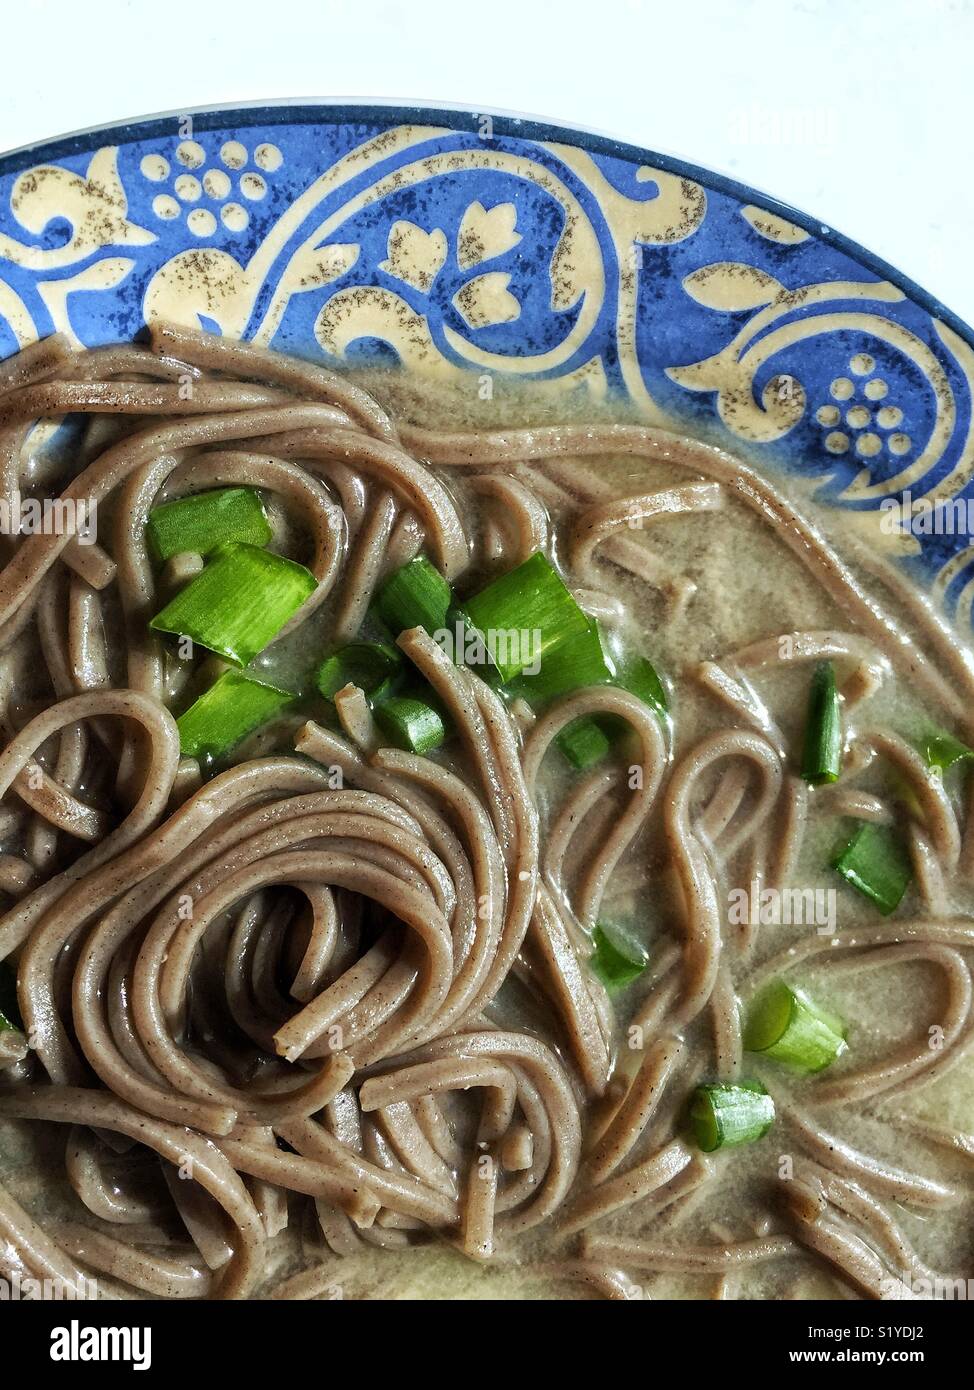 Buckwheat soba noodles in homemade miso soup Stock Photo